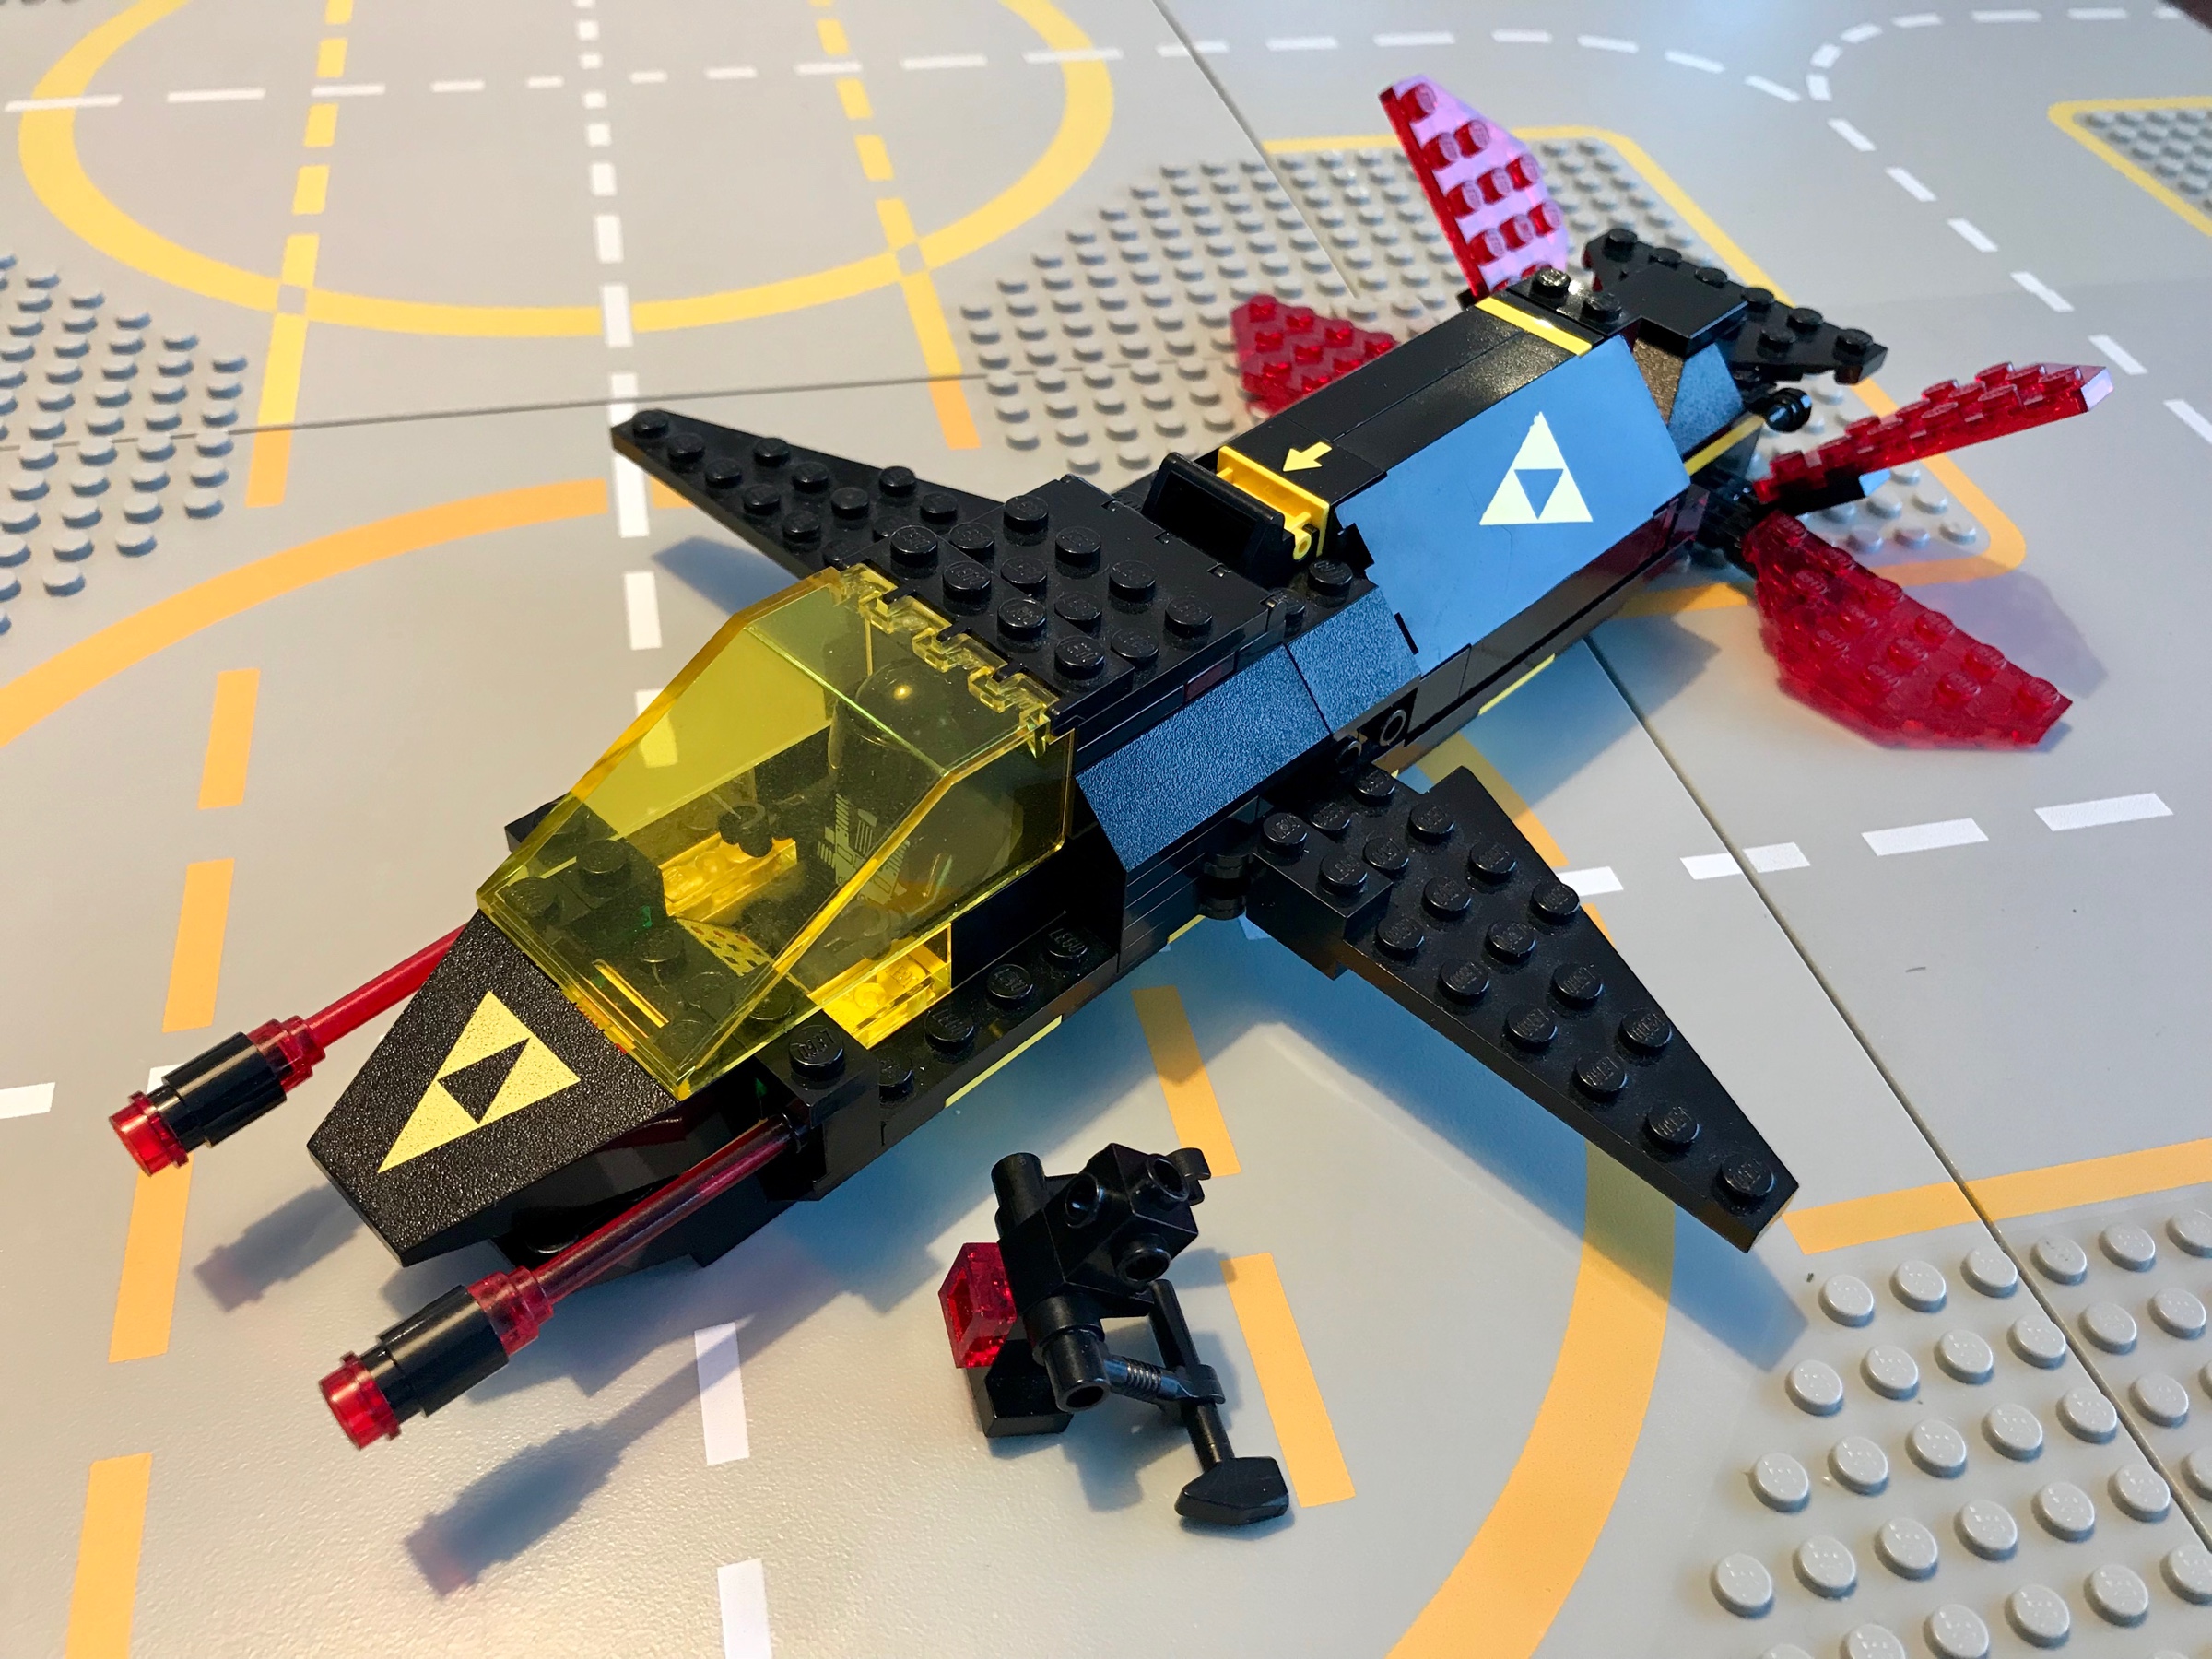 LEGO Blacktron spaceship in black with yellow highlights, transparent yellow windows, and four transparent red fins on the tail.